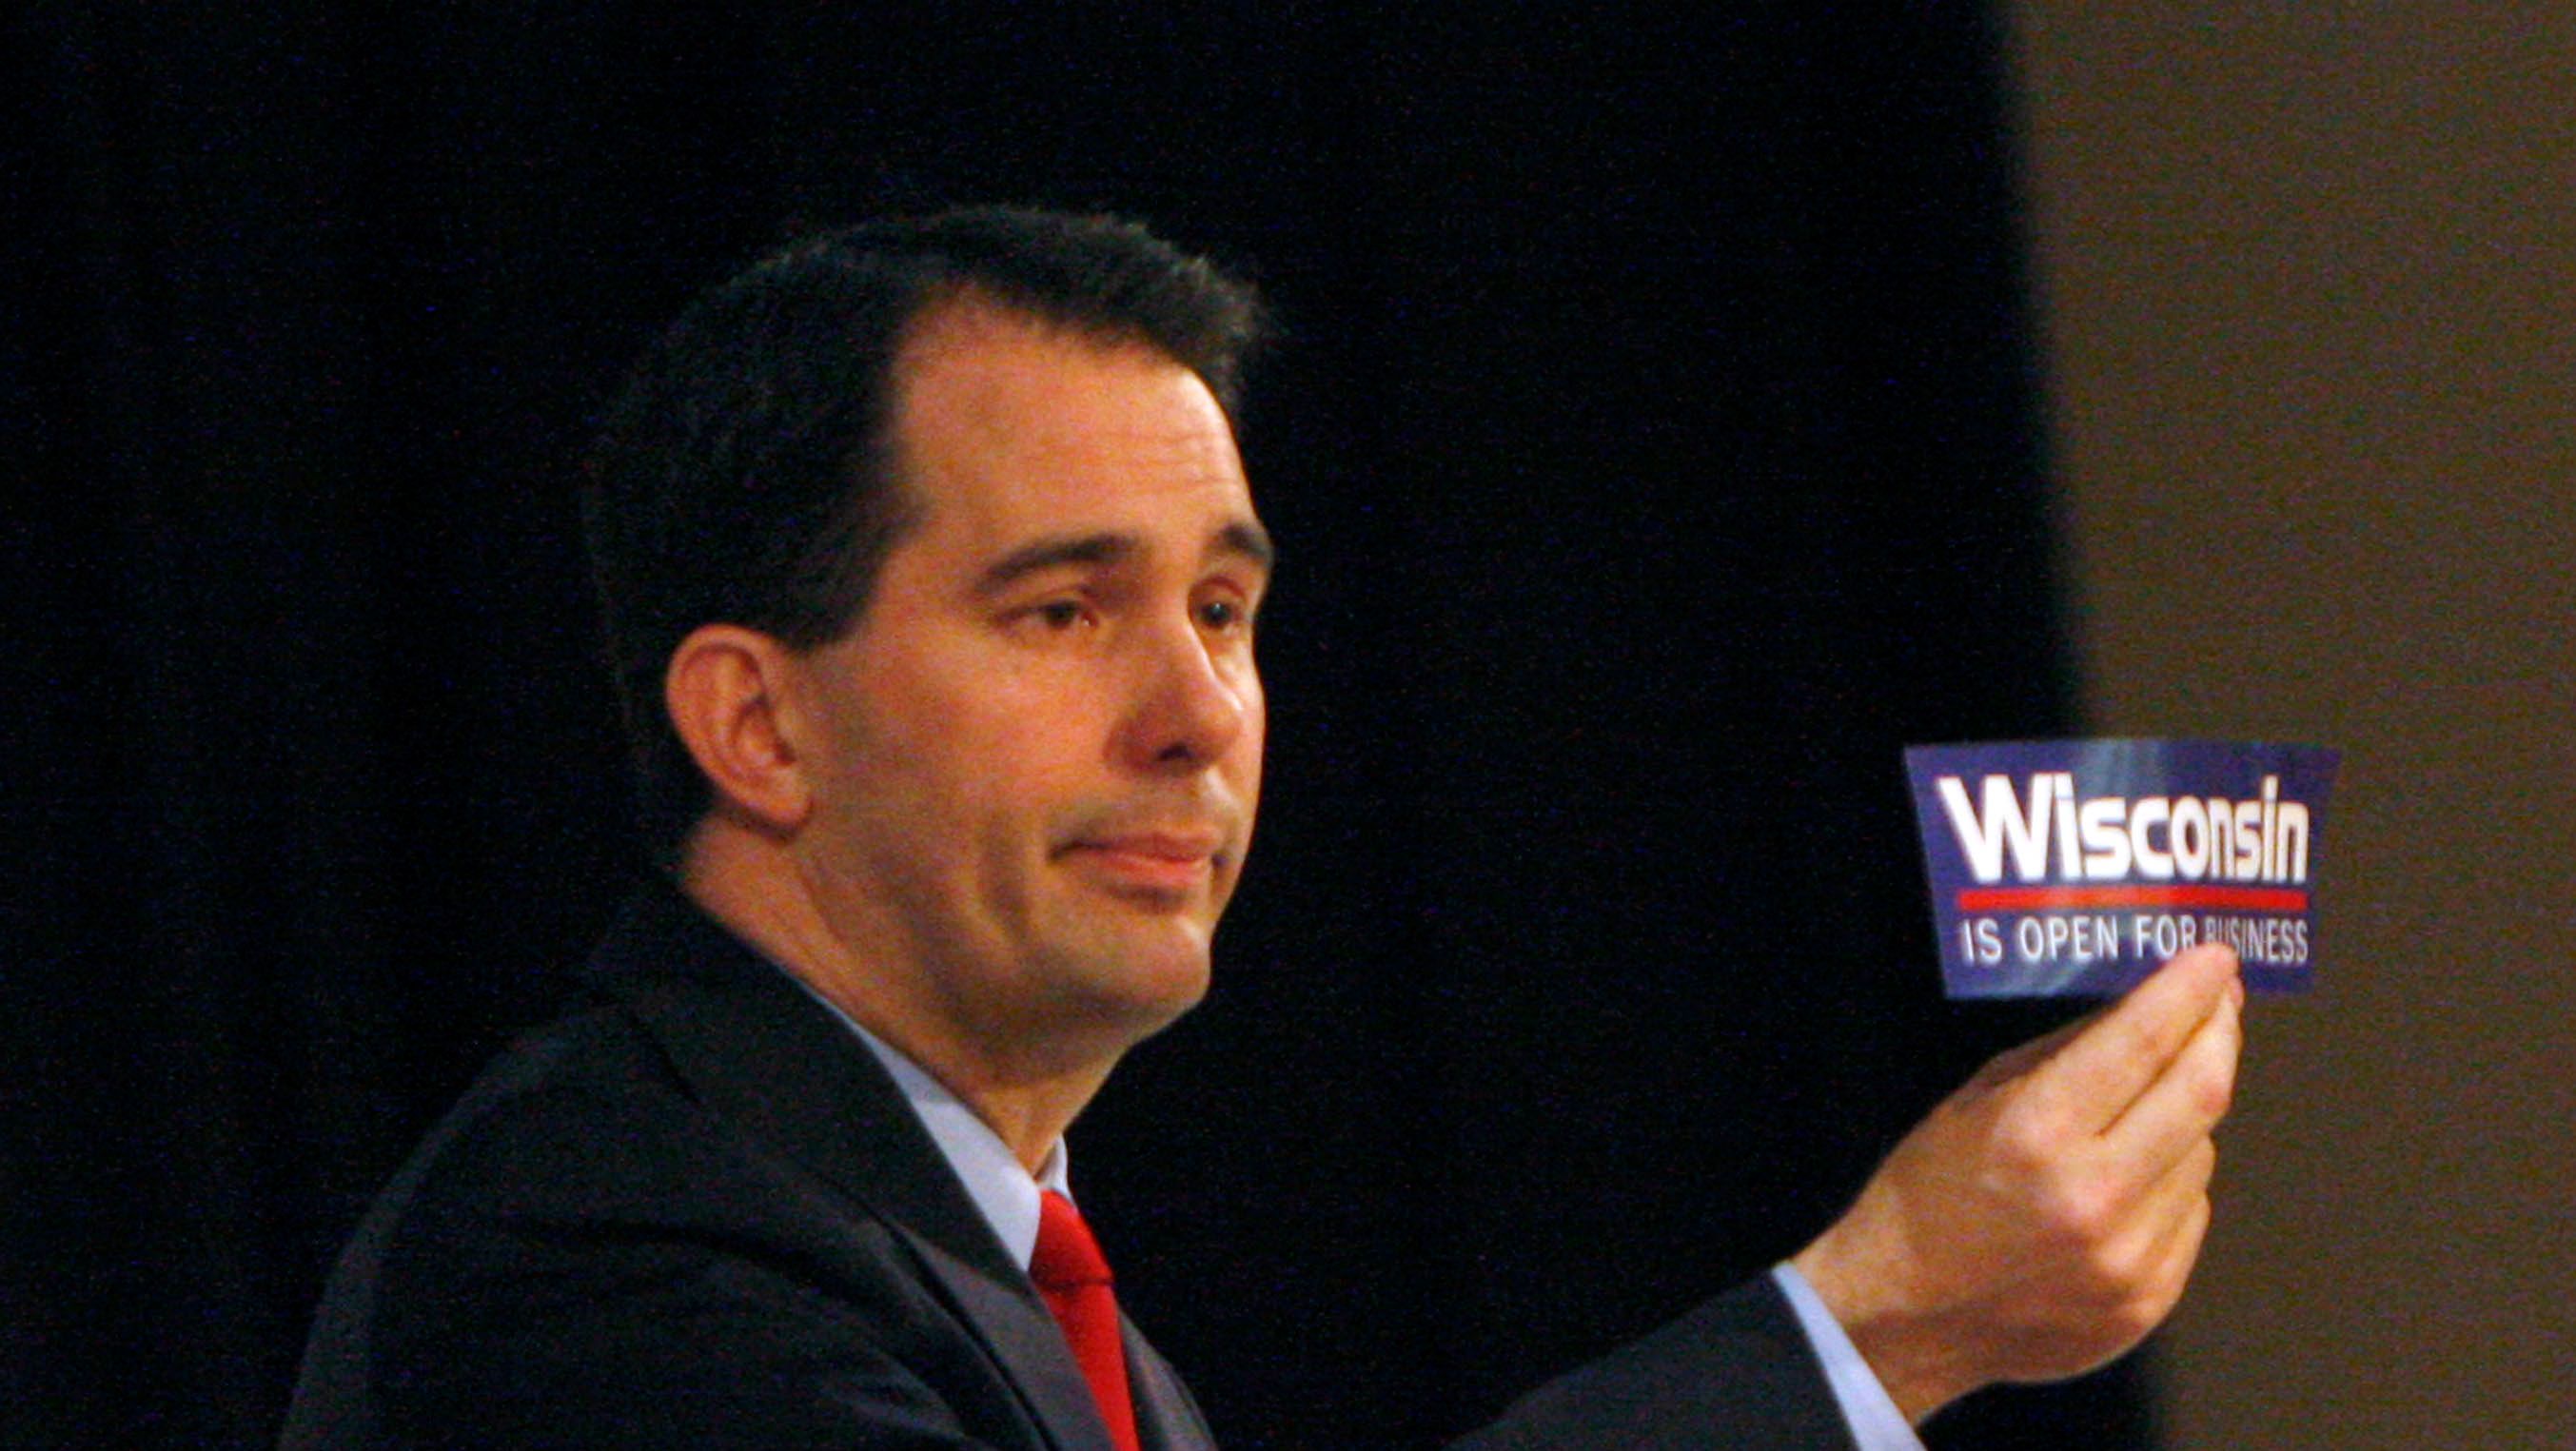 Scott Walker’s ‘Open for Business’ appreciated signs will before long be bypass markers